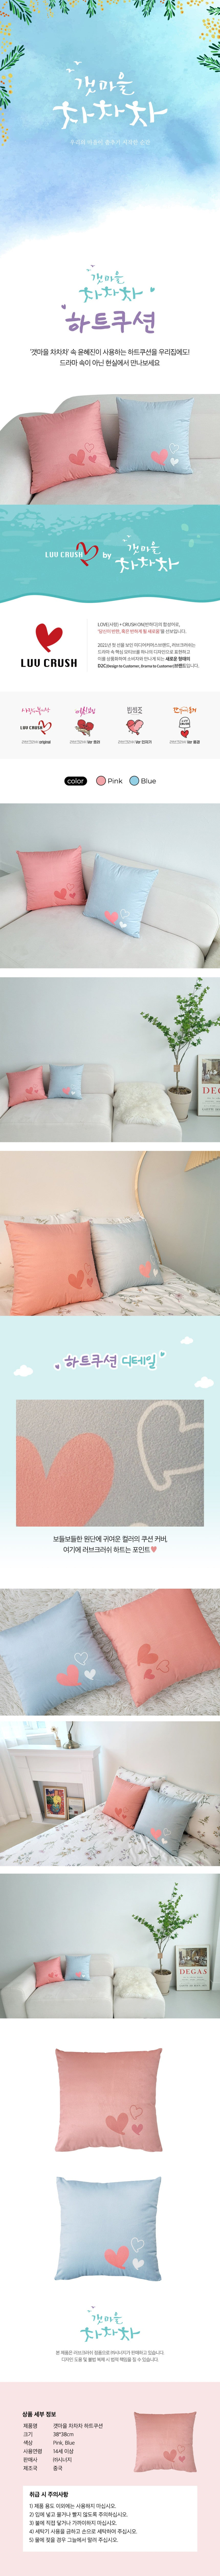 Hometown Cha-Cha-Cha Goods Heart Cushion  Witness the heartwarming human story of the people of Gongjin in the seaside village <Hometown Cha-Cha-Cha> Writer's Edition Uncut Script Collection.   The vast sea, the blue sky, the two main actors Shin Min-ah and Kim Seon-ho, are full of charms that you can't help but love. Also, the people of Gongjin, with their own heartbreaking narratives, captured the hearts of global drama fans.  Hye-jin and Doo-sik are caught up in every move by the people of Gongjin without the word 'secret love.' However, there is a token of love that only they possess. A love letter! What kind of story would be contained if Hyejin and Dooshik exchanged a 'love letter' that could only have more sincerity? Hyejin and Dooshik's love letters, which will keep the afterglow of the drama undying, are included in this book set.   Component Hometown Cha-Cha-Cha Goods Heart Cushion x 1ea  Option PINK, BLUE  Country Of Origin Republic Of Korea